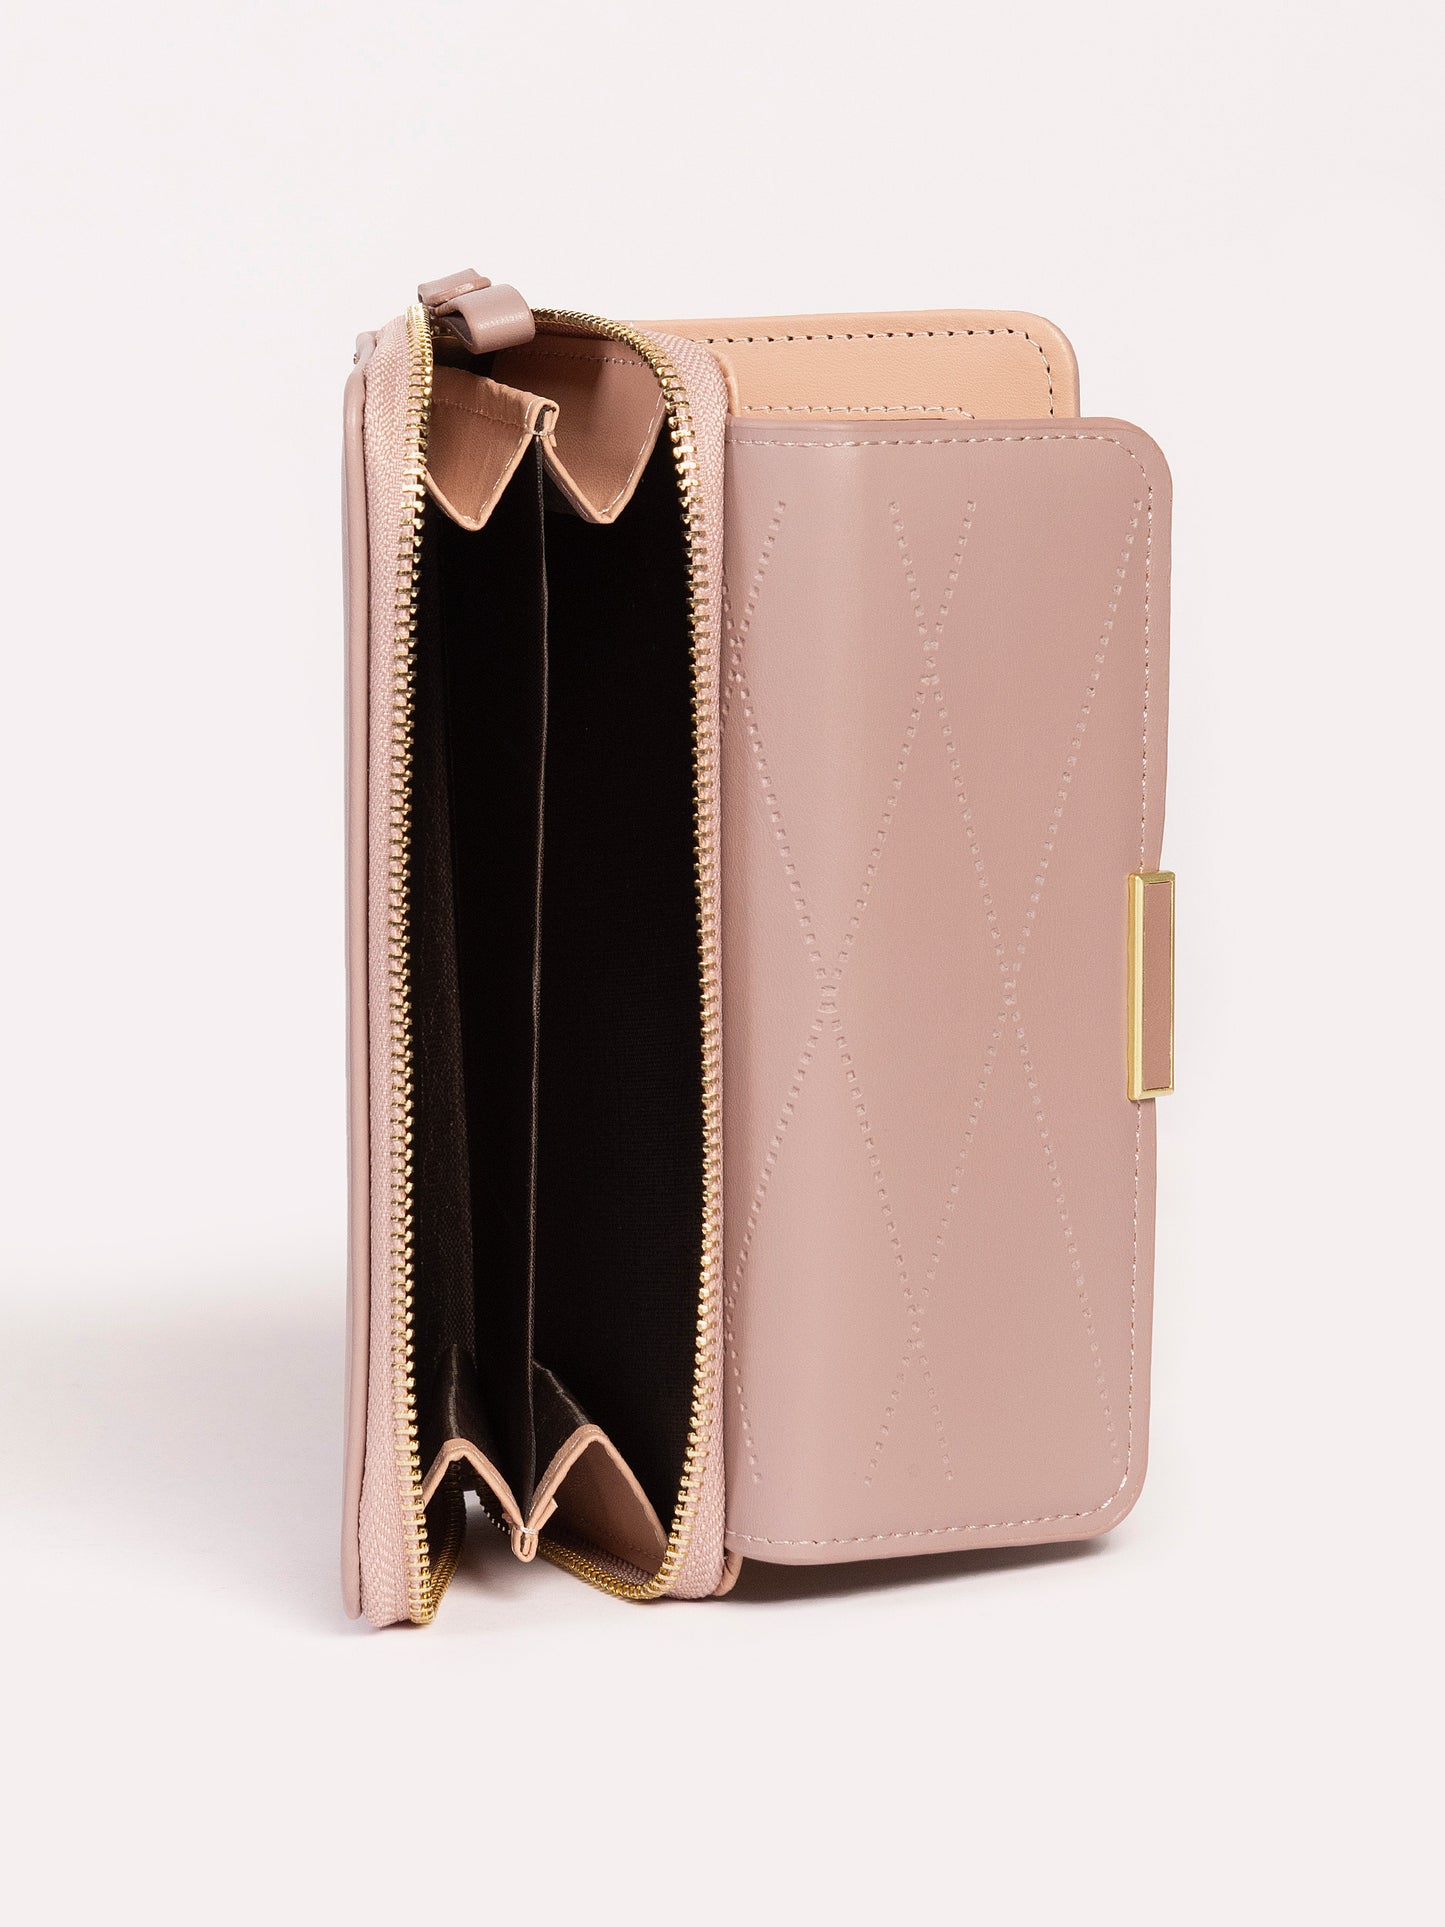 BOOK STYLE WALLET